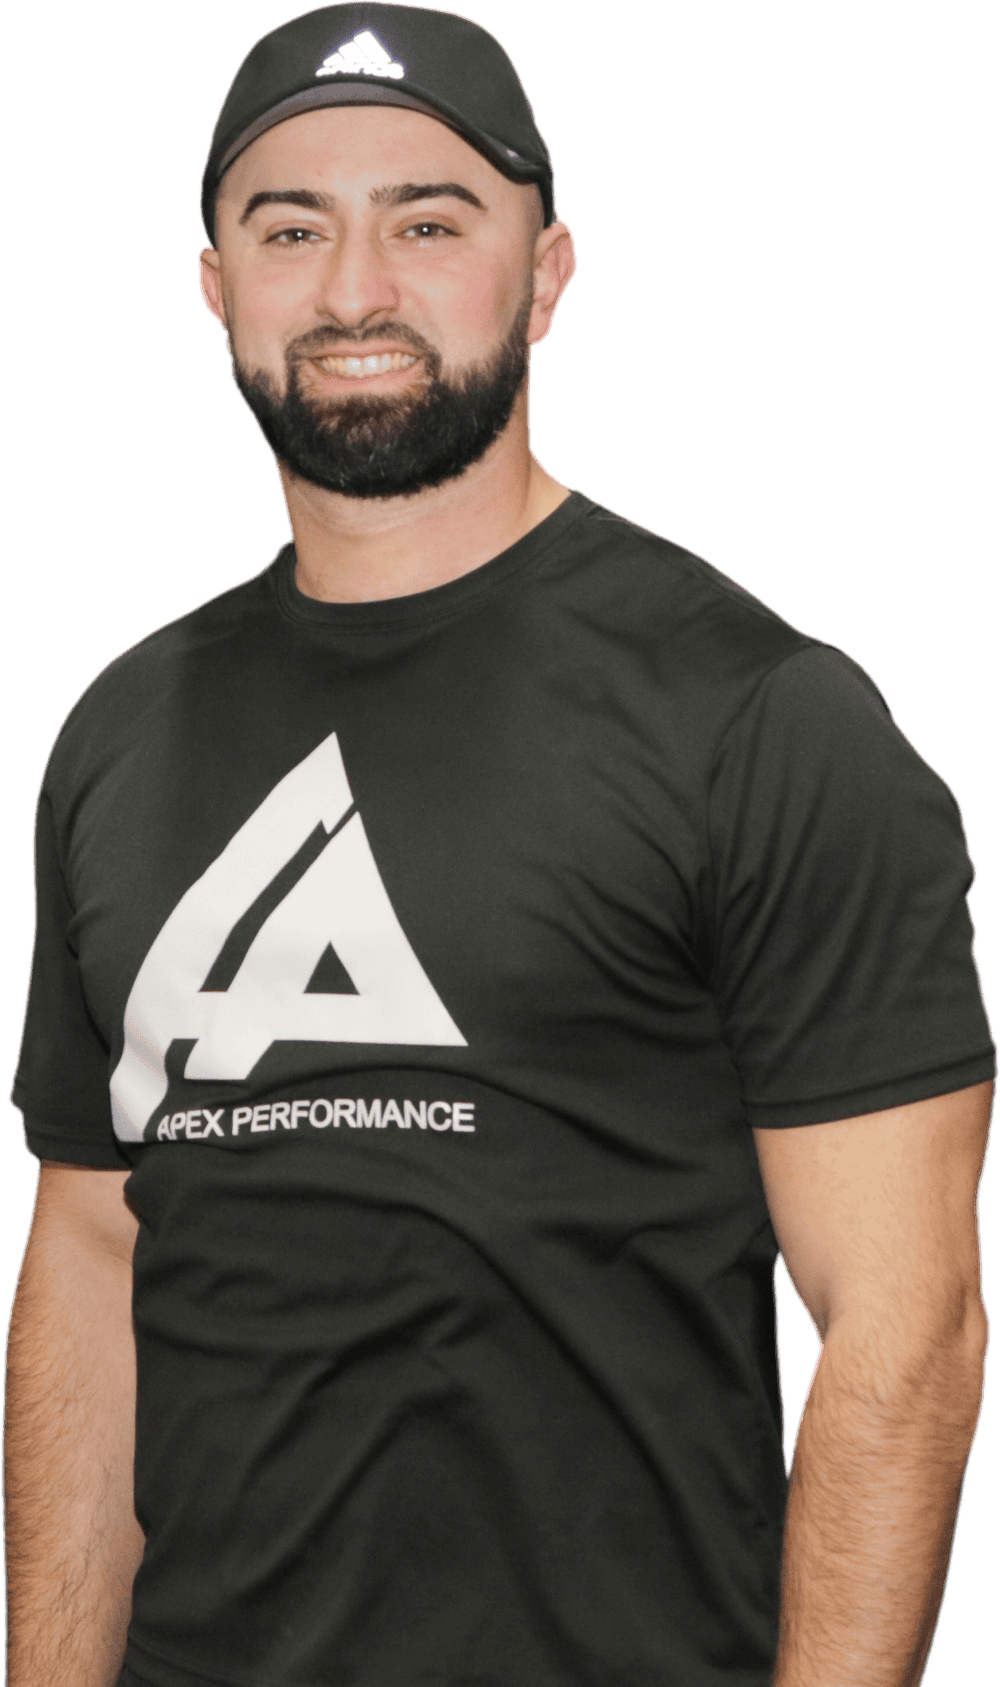 Picture of andrew Andrew Capul, owner of Apex Gym in Rockland County, NY